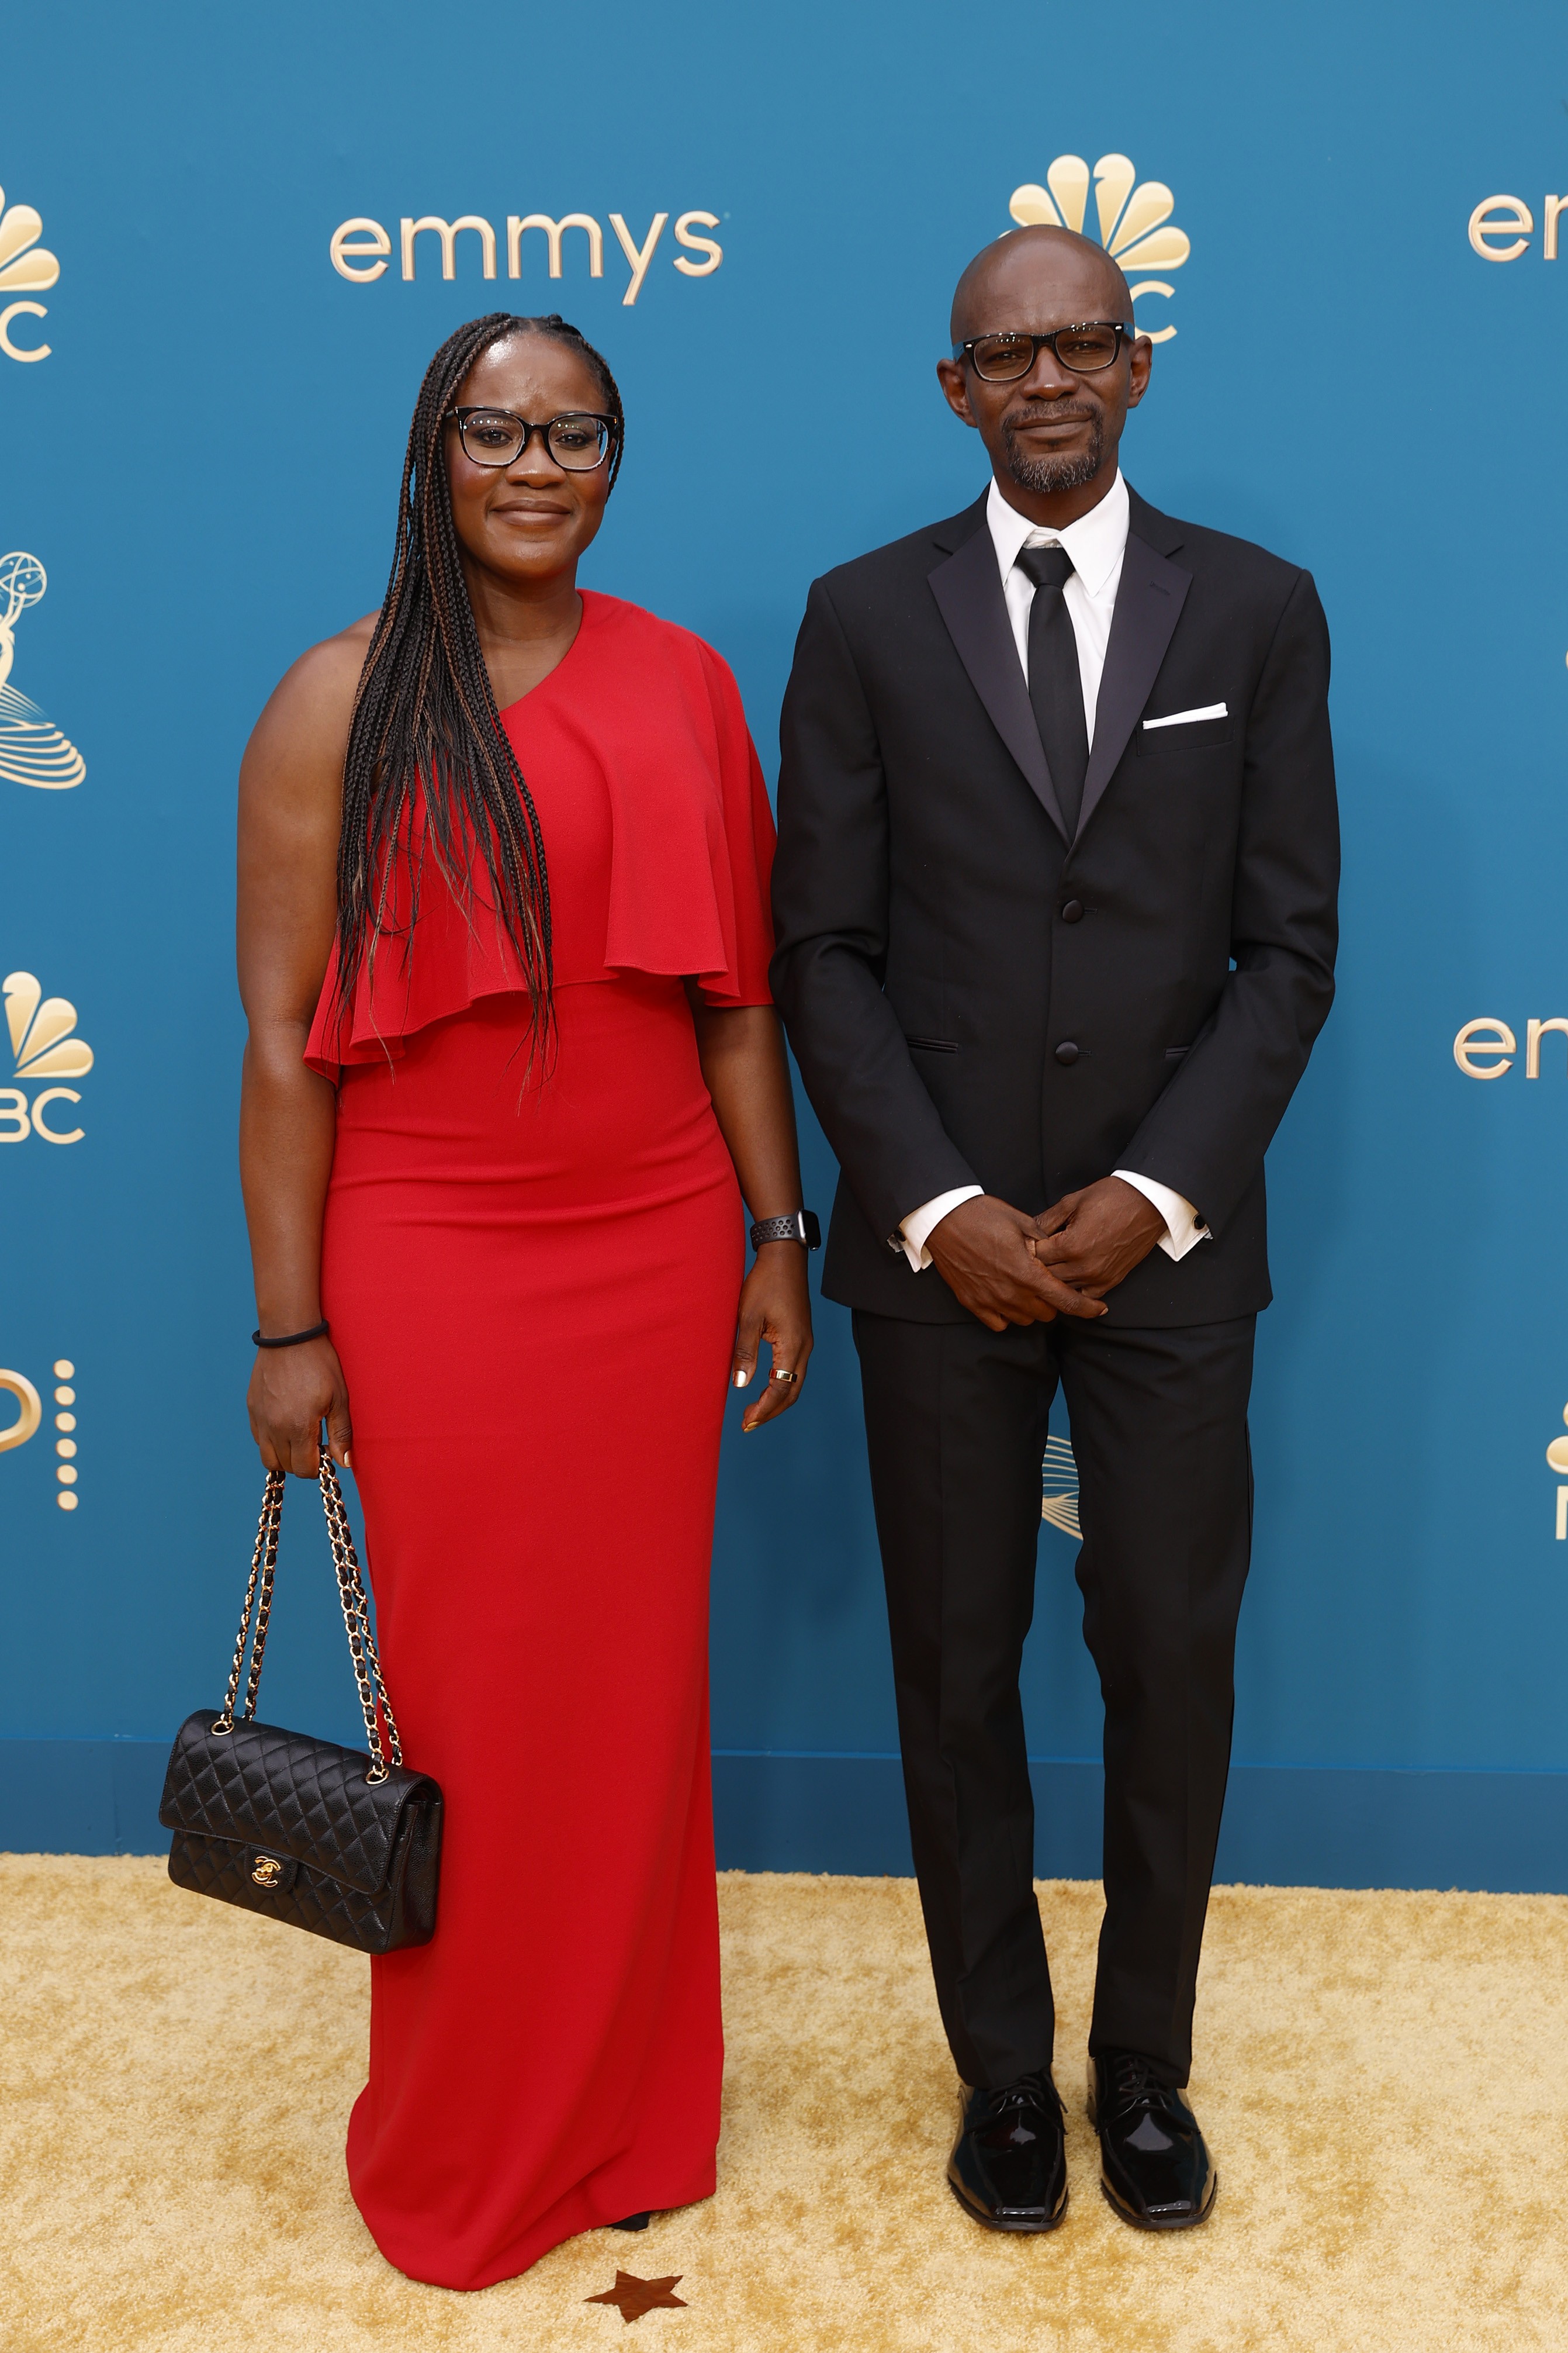 LOS ANGELES, CALIFORNIA - SEPTEMBER 12: 74th ANNUAL PRIMETIME EMMY AWARDS -- Pictured: (l-r) Abby Ajayi and Akin Ajayi arrive to the 74th Annual Primetime Emmy Awards held at the Microsoft Theater on September 12, 2022. -- (Photo by Trae Patton/NBC via Ge (Foto: NBC via Getty Images)